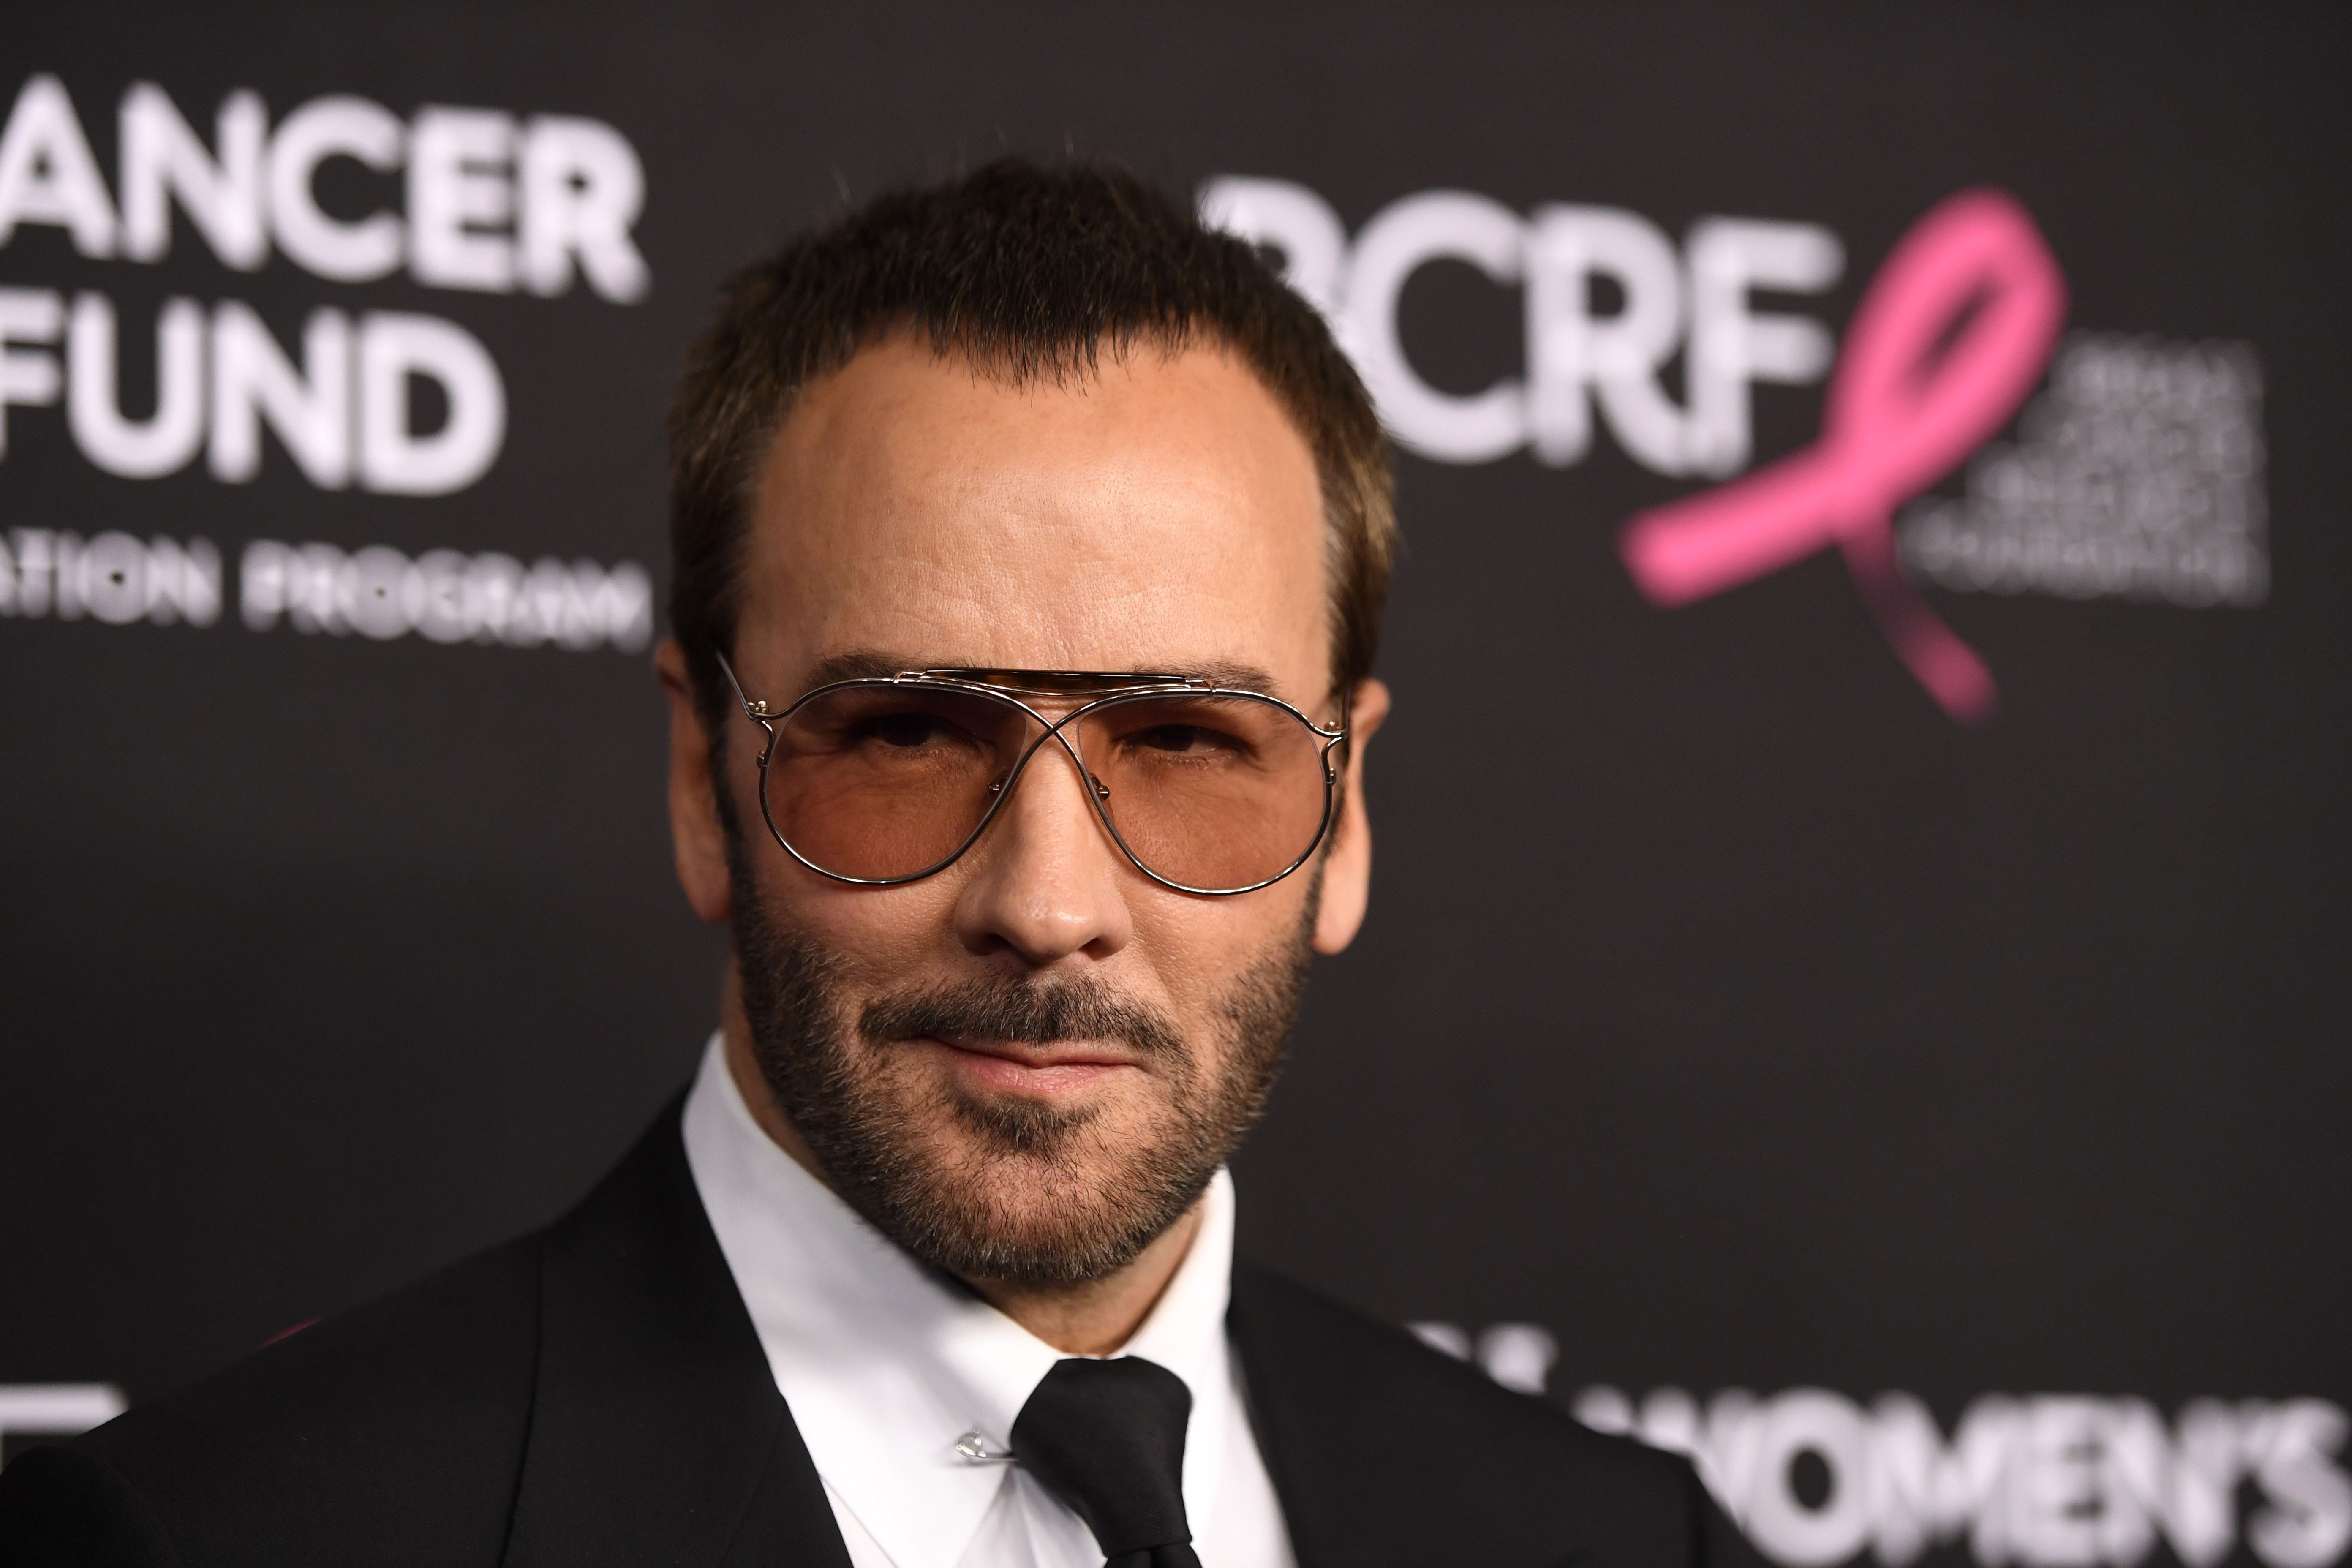 Designer Tom Ford is the chairman of the Council of Fashion Designers of America and is expected to give New York Fashion Week a much-needed facelift. Photo: Frazer Harrison